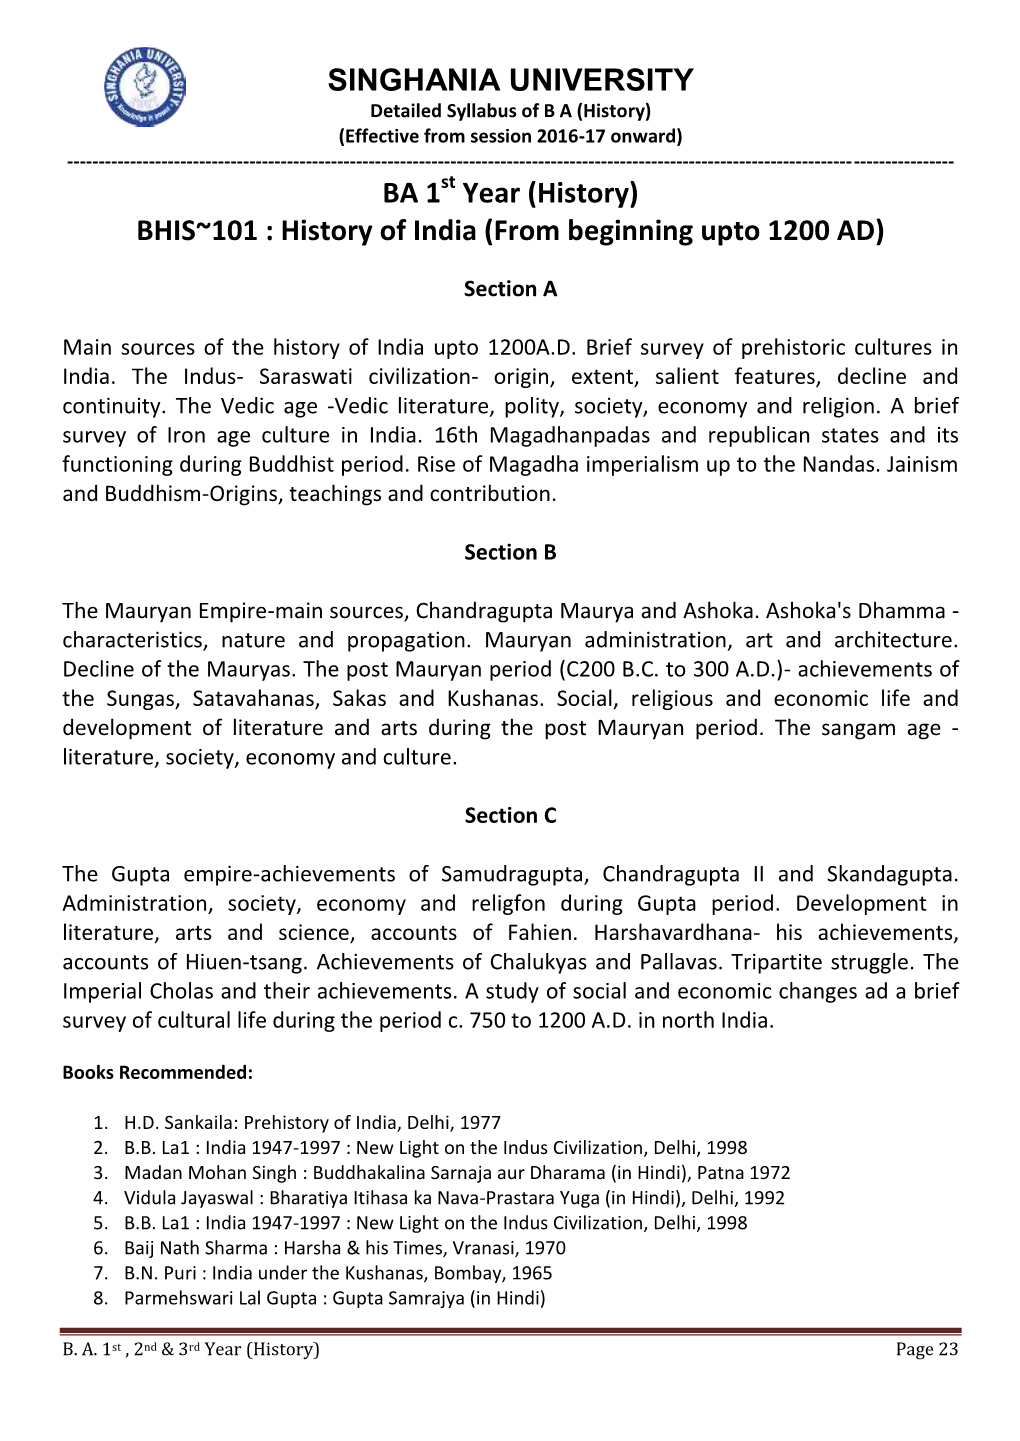 BHIS~101 : History of India (From Beginning Upto 1200 AD)